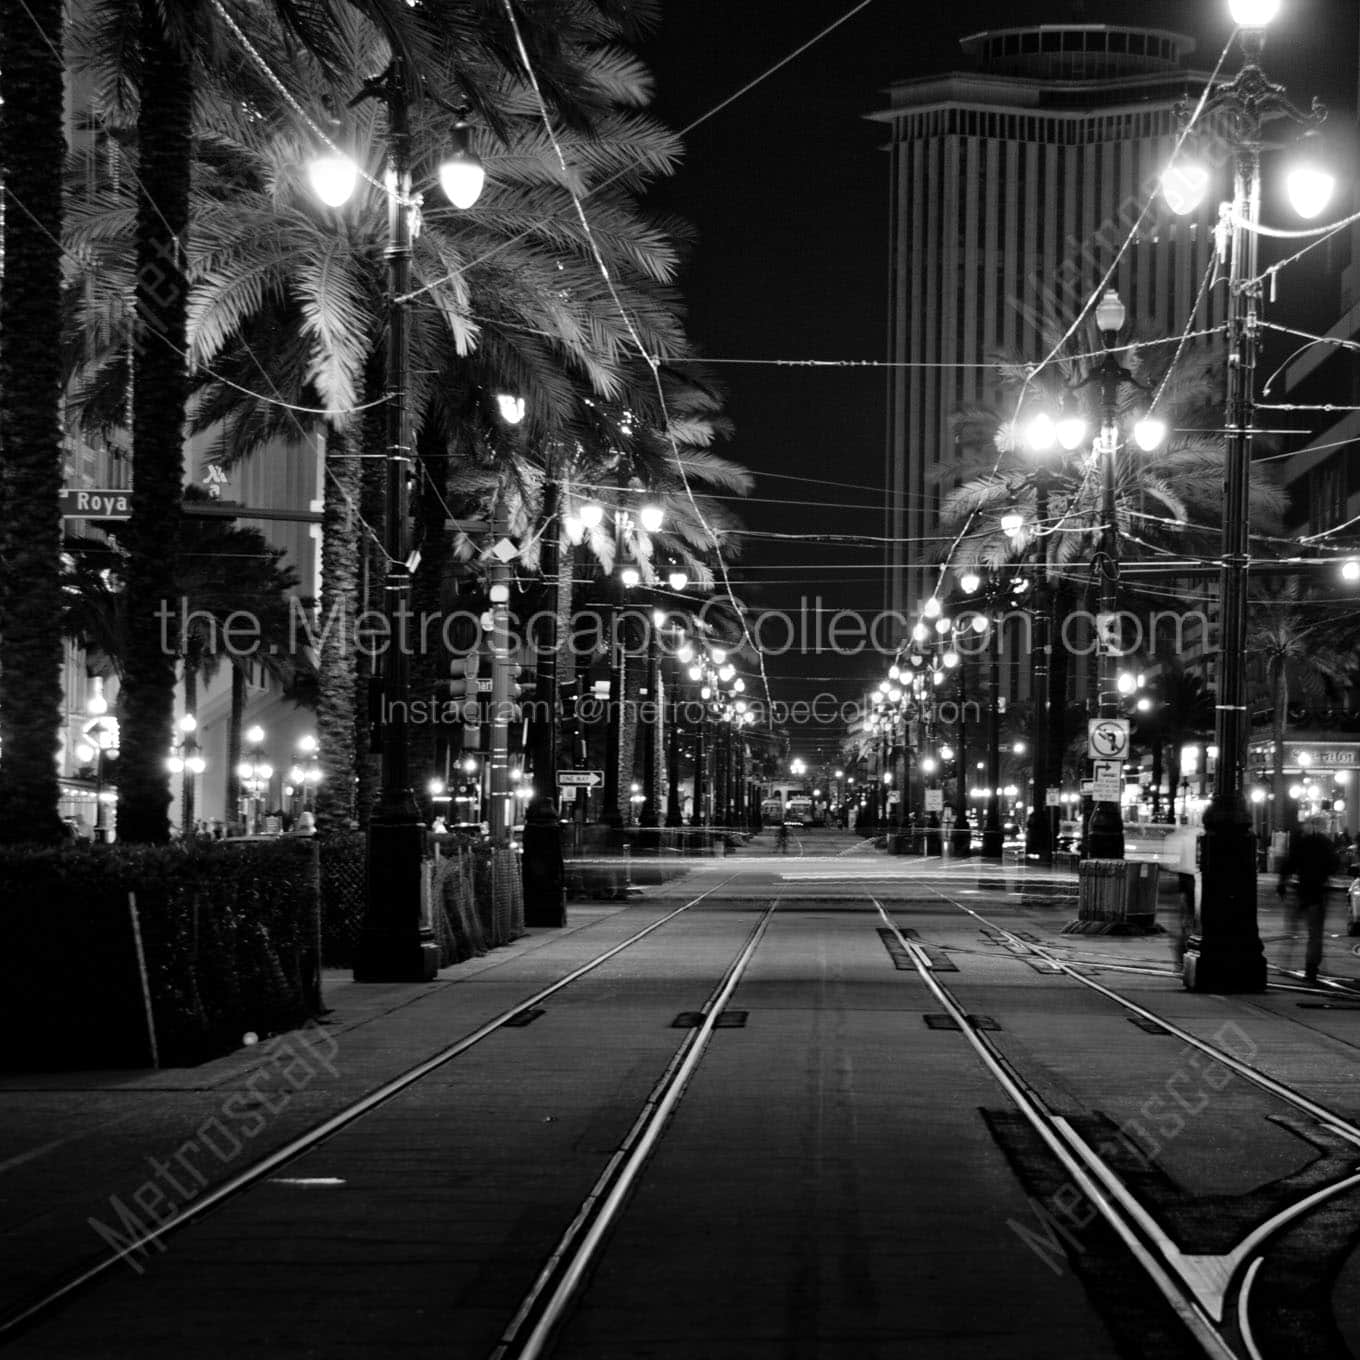 canal and royal street at night Black & White Office Art